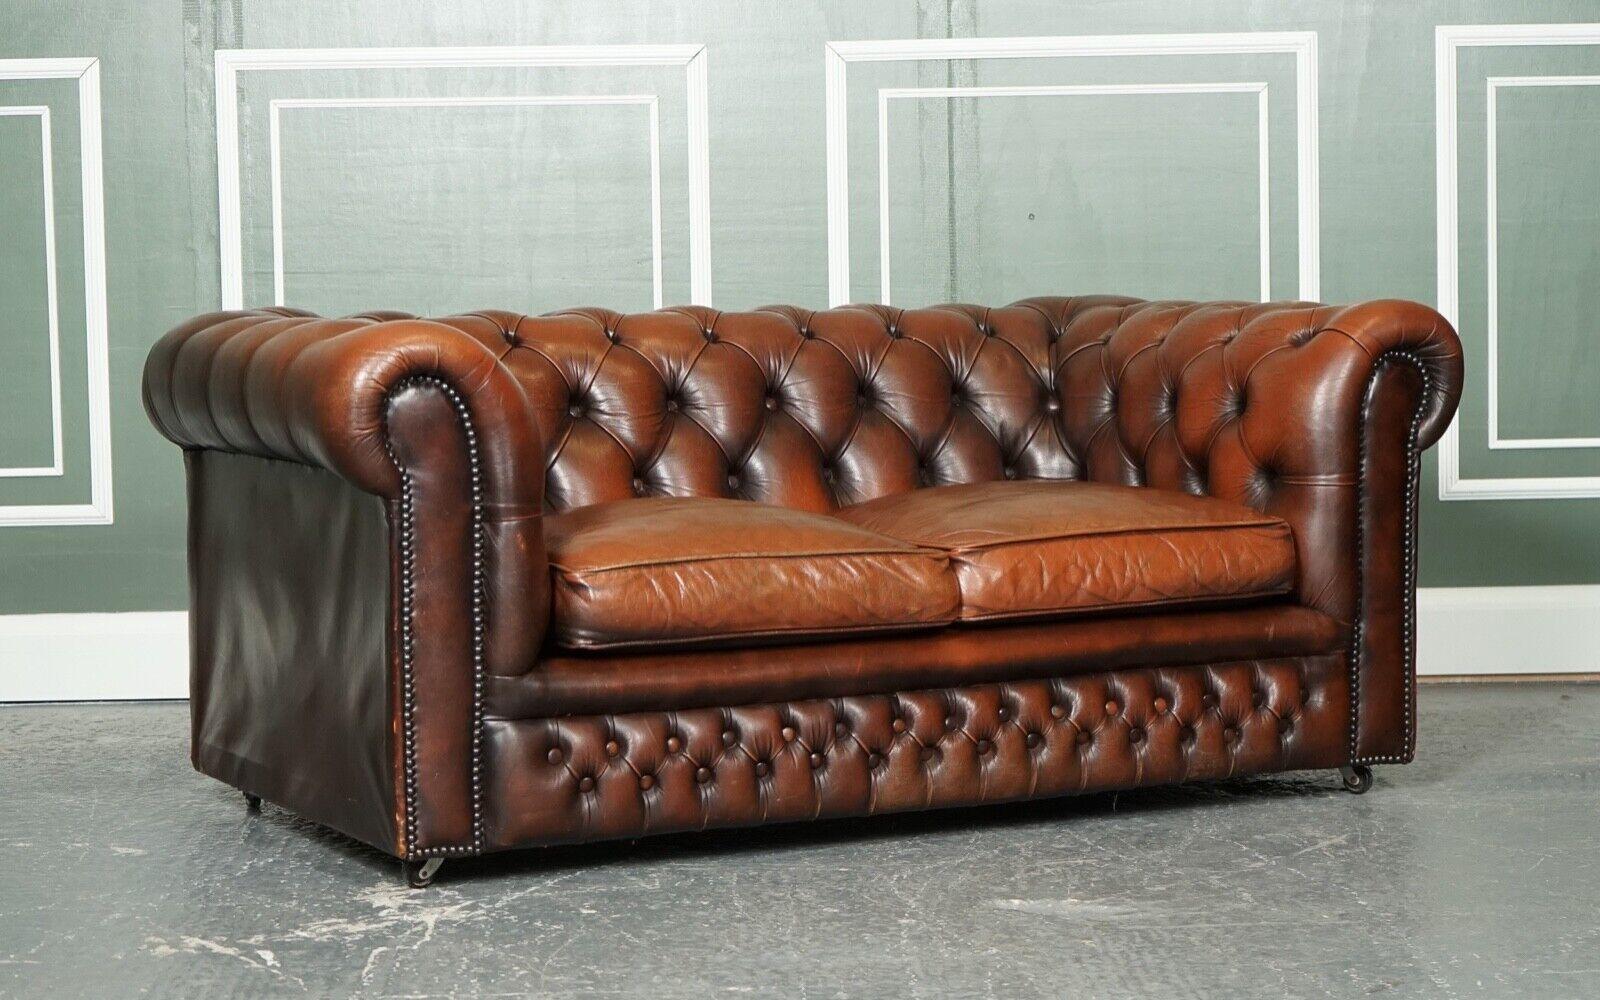 We are so excited to present to you this lovely vintage distressed brown leather chesterfield sofa.

Very good looking sofa, it can sit two to three people.

The sofa is raised on four castors which makes it easy to move if needed.

As